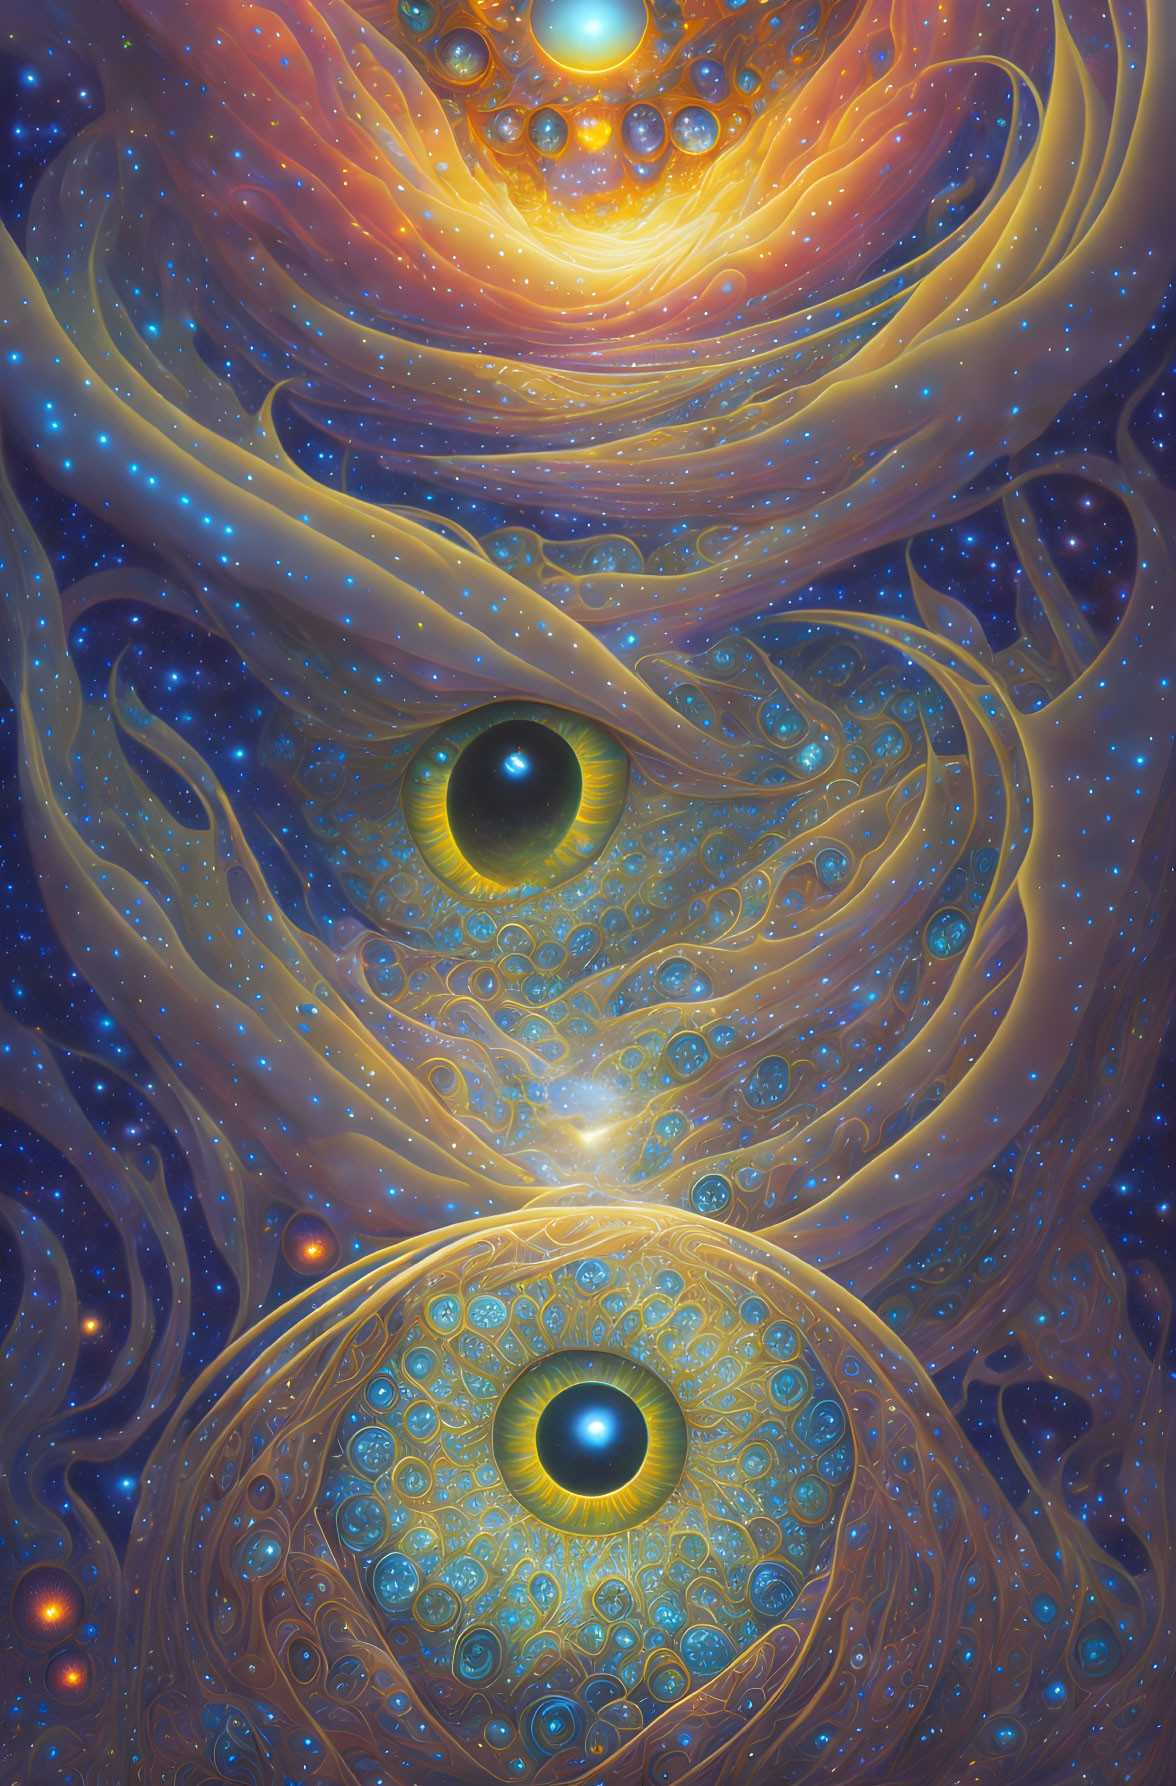 Colorful cosmic artwork with swirling patterns and three eyes against a starry backdrop